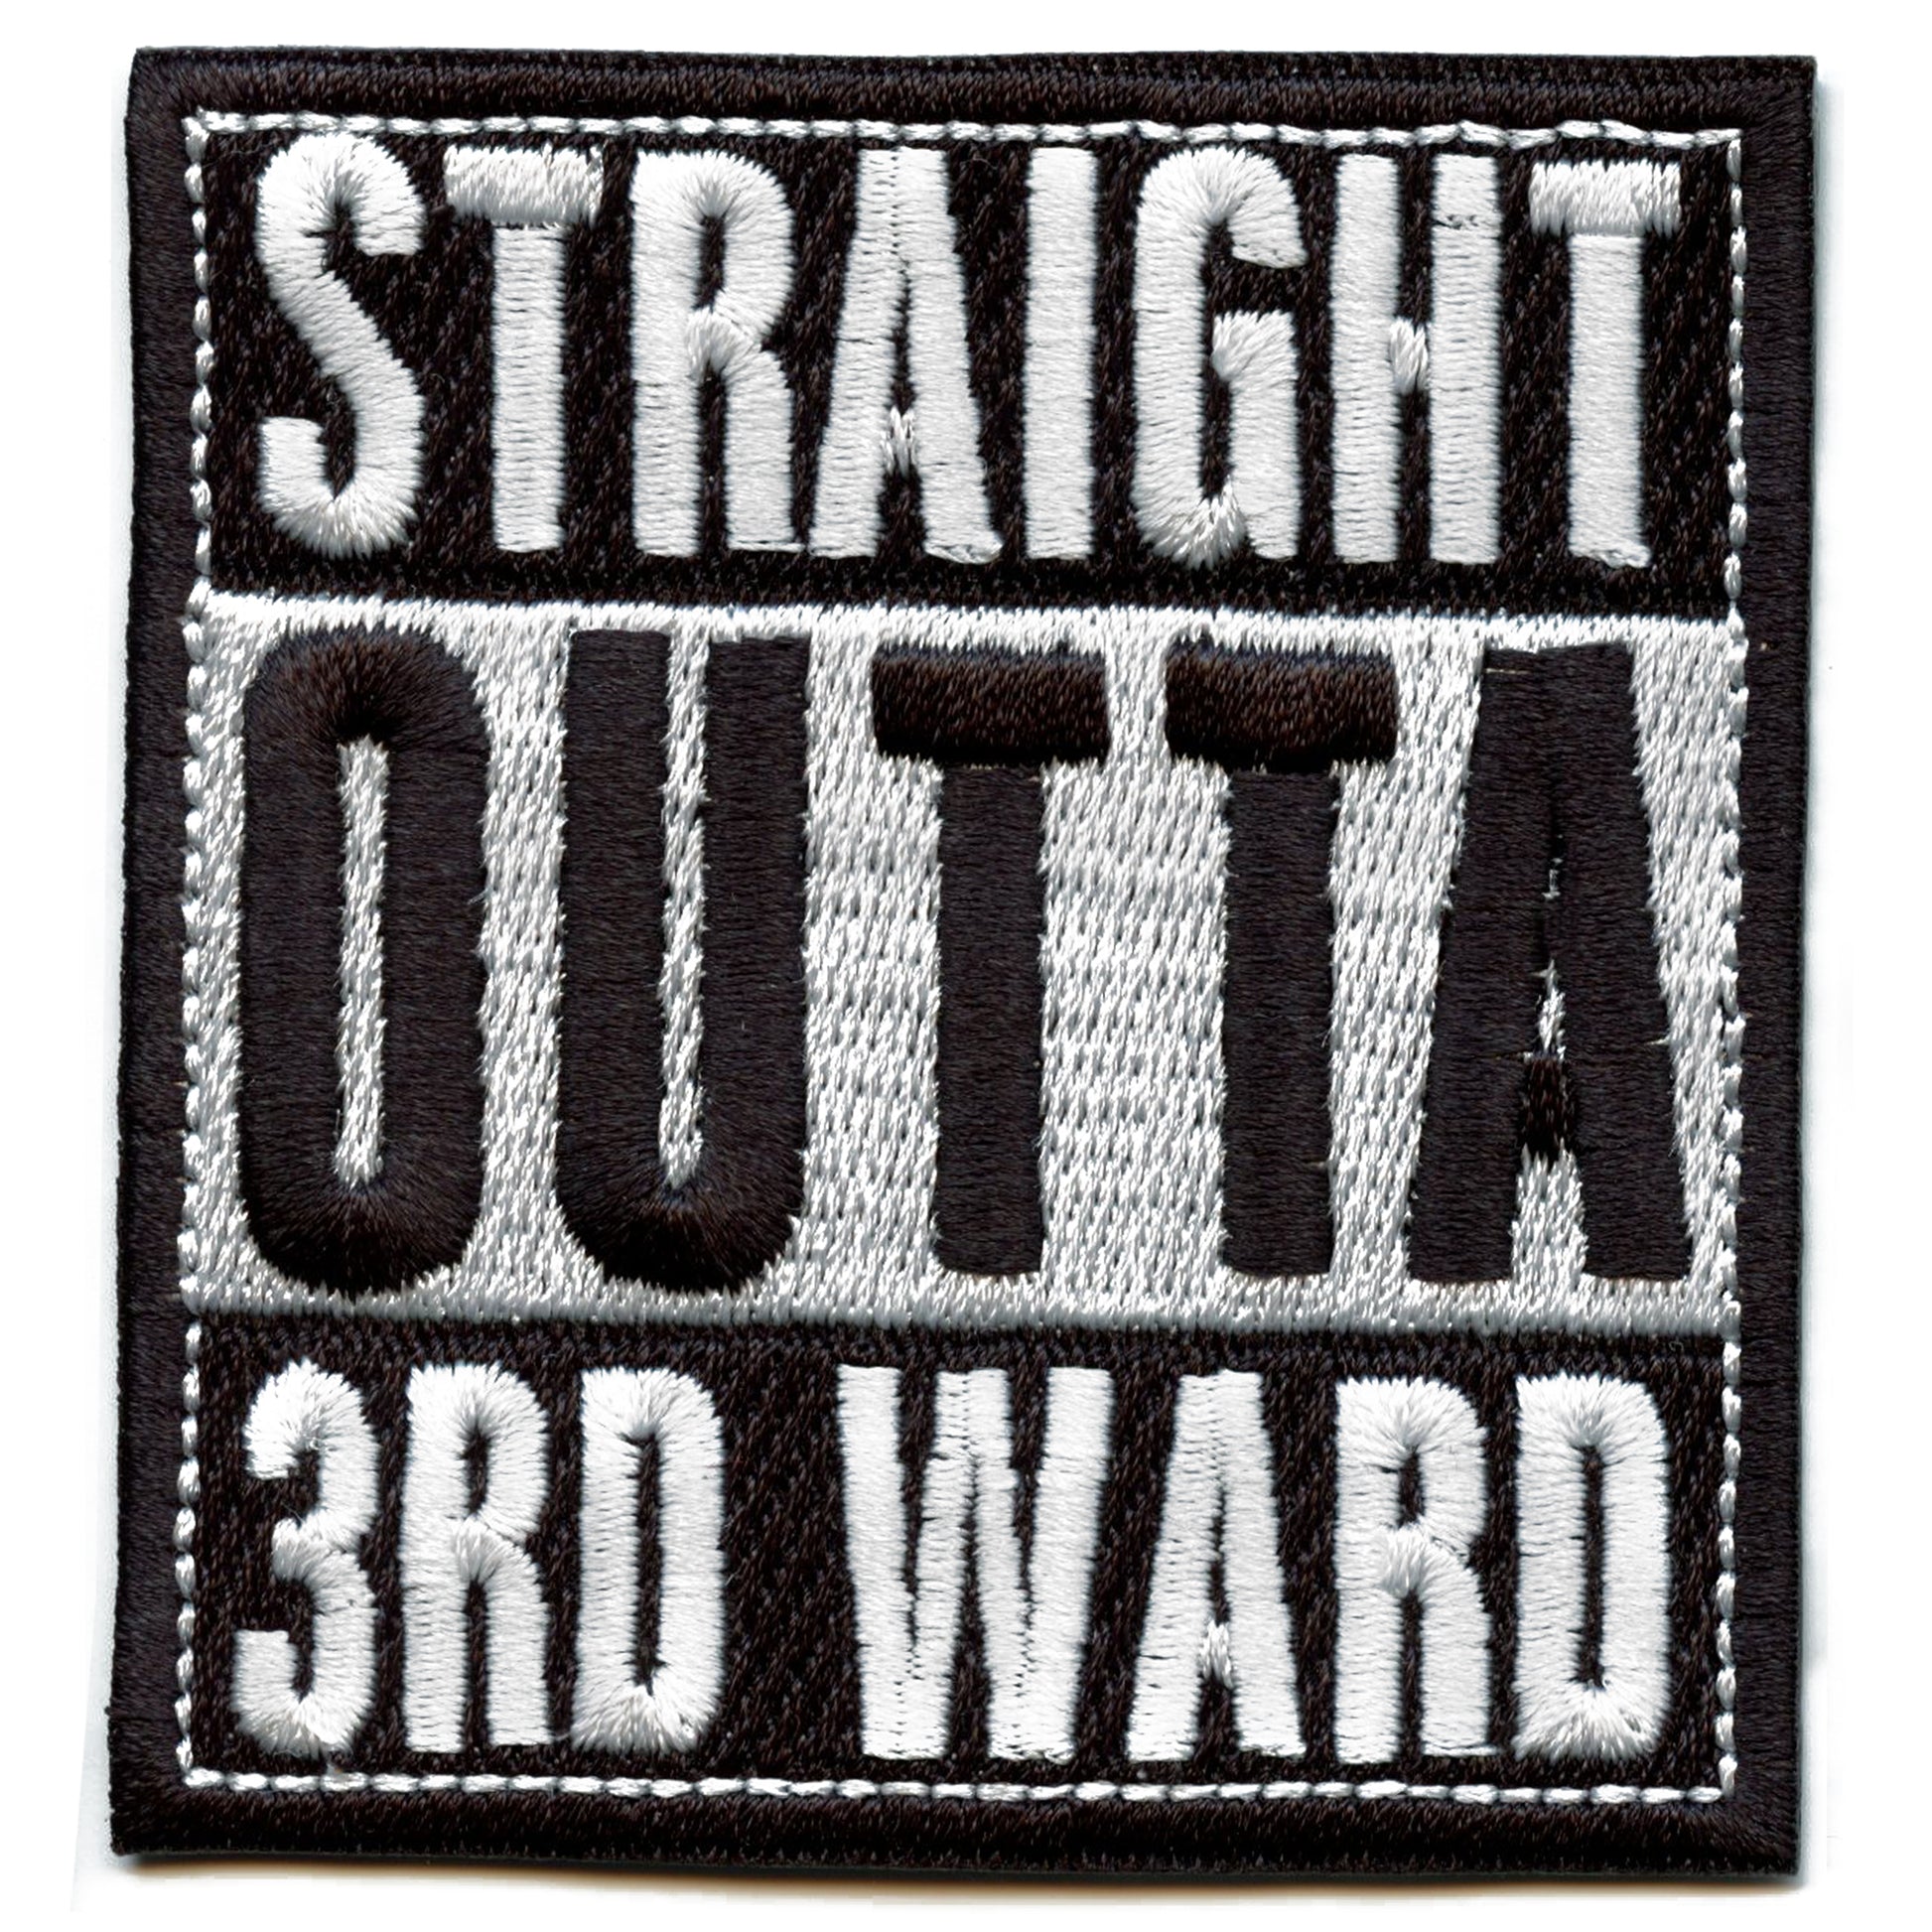 Straight Outta 3rd Ward Houston Texas Box Logo Embroidered Iron On Patch 